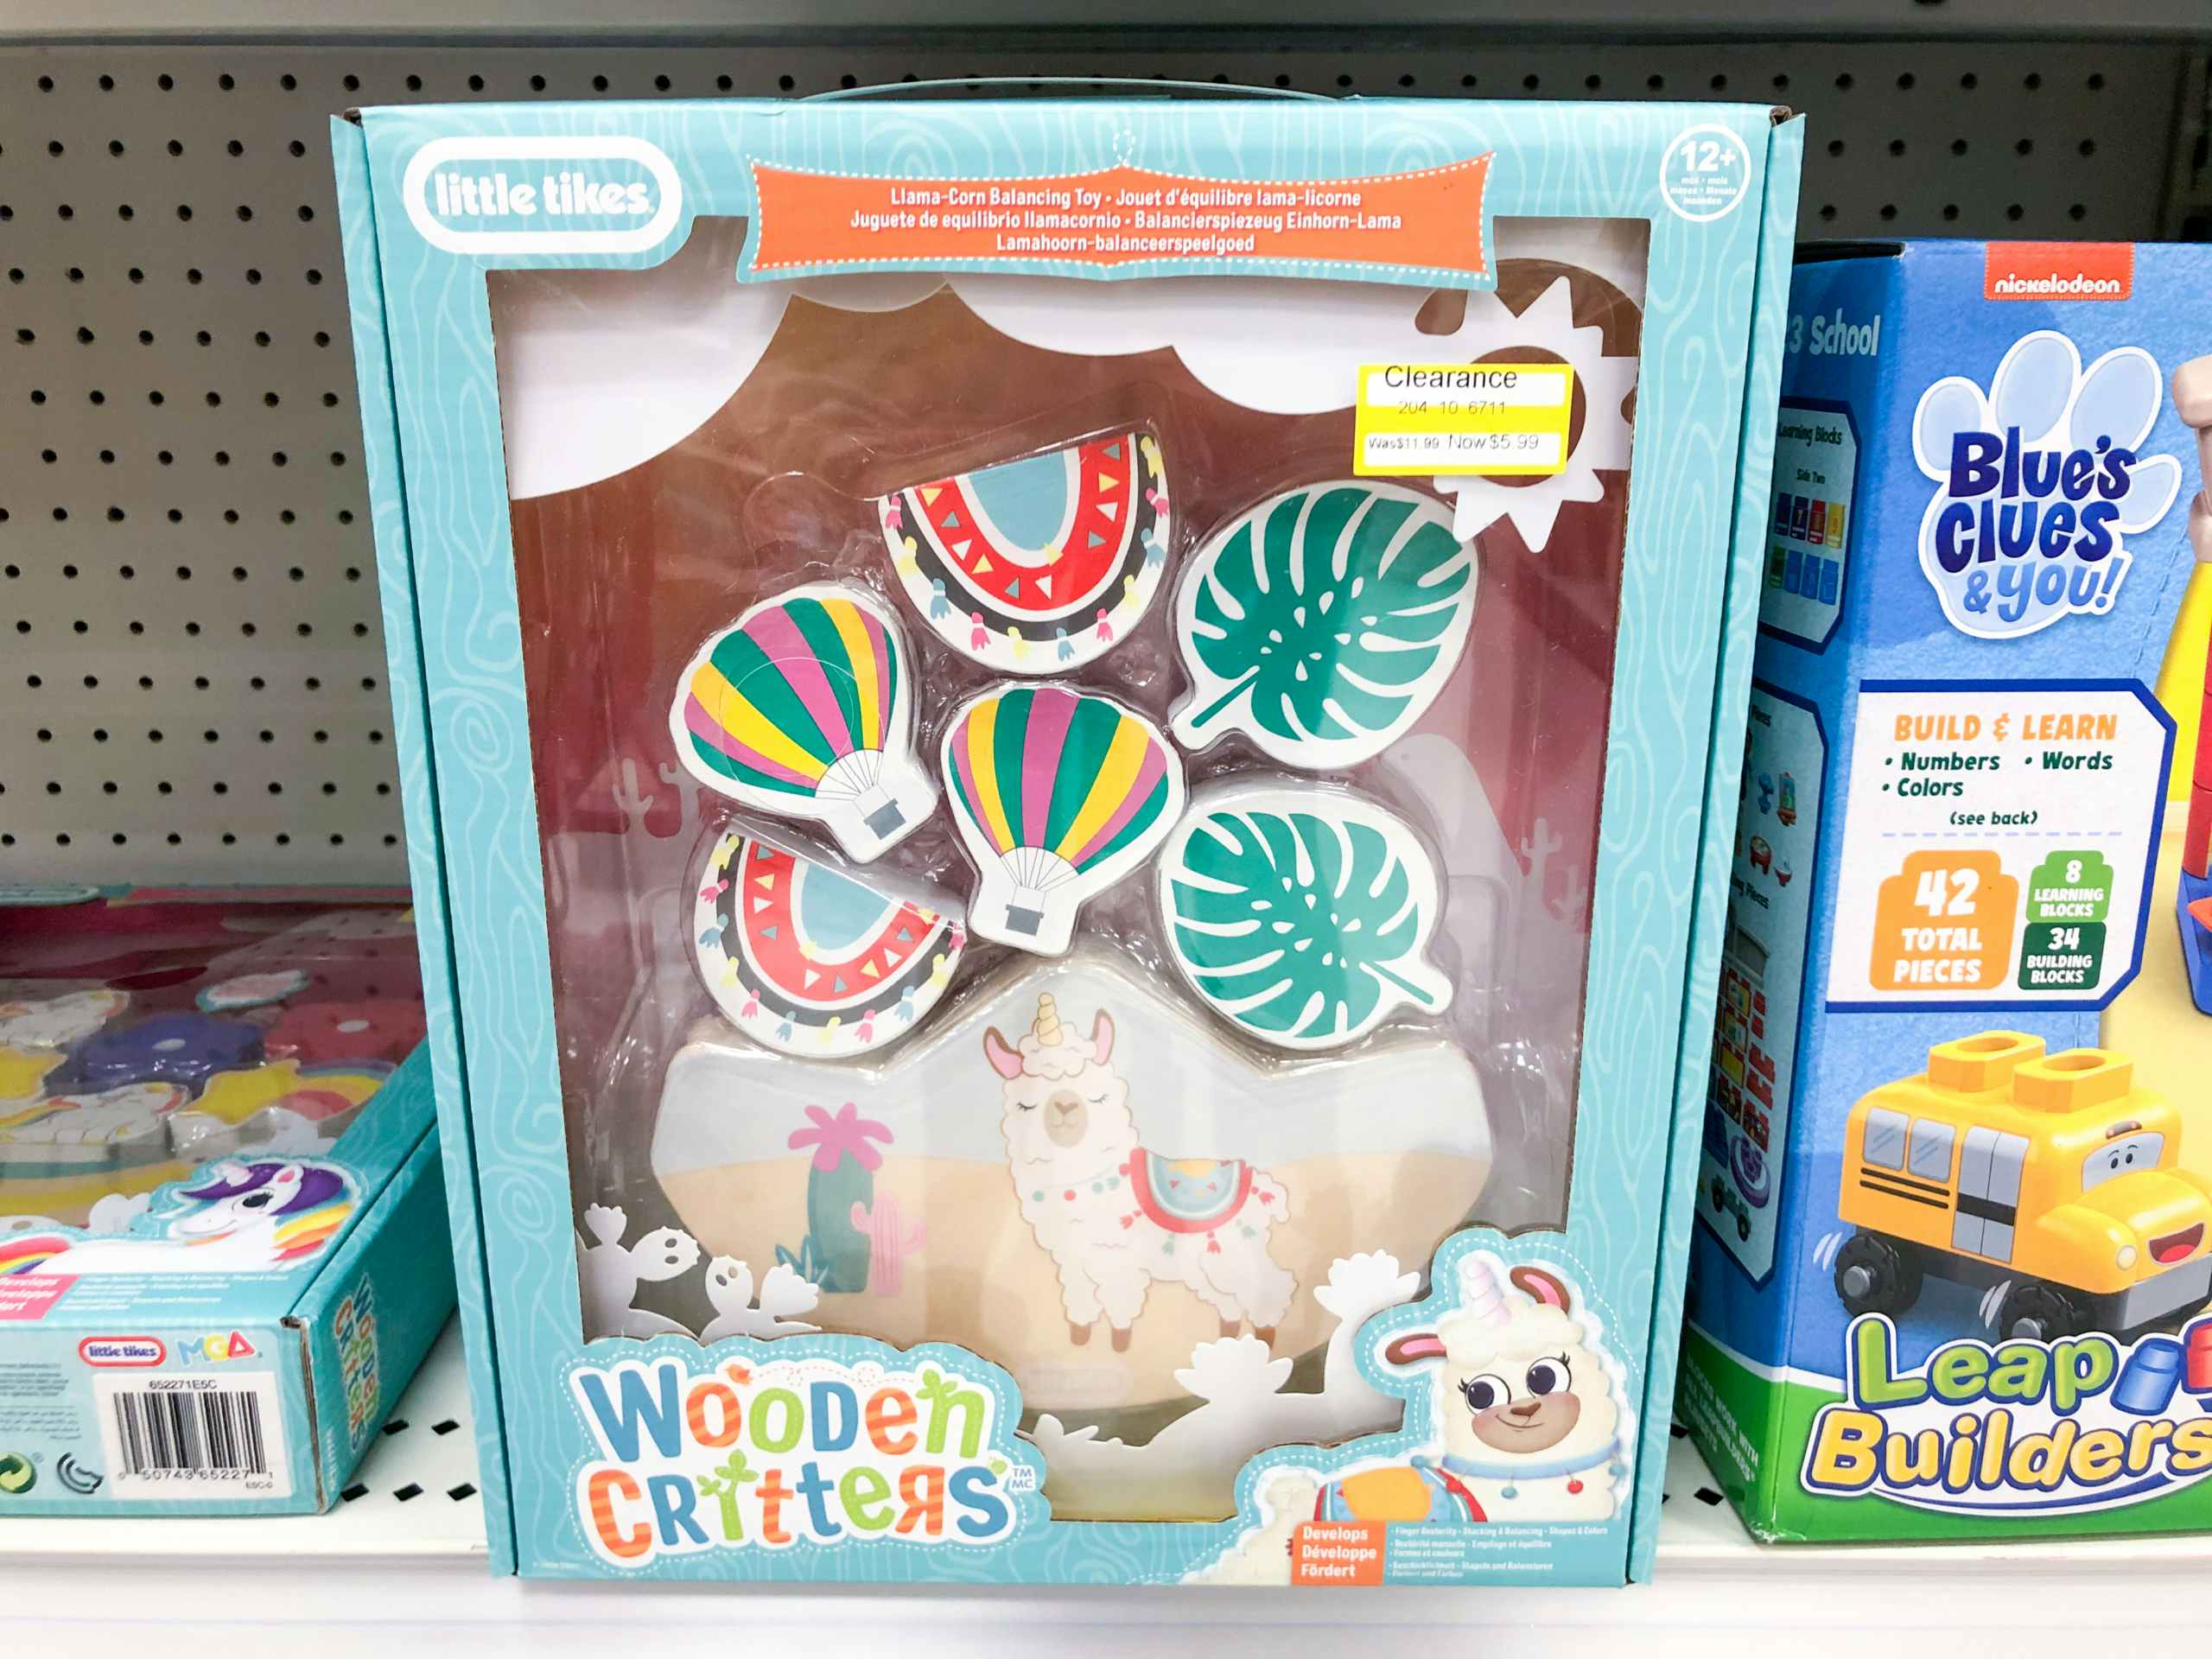 Little Tikes wooden critter toy on store shelf on clearance